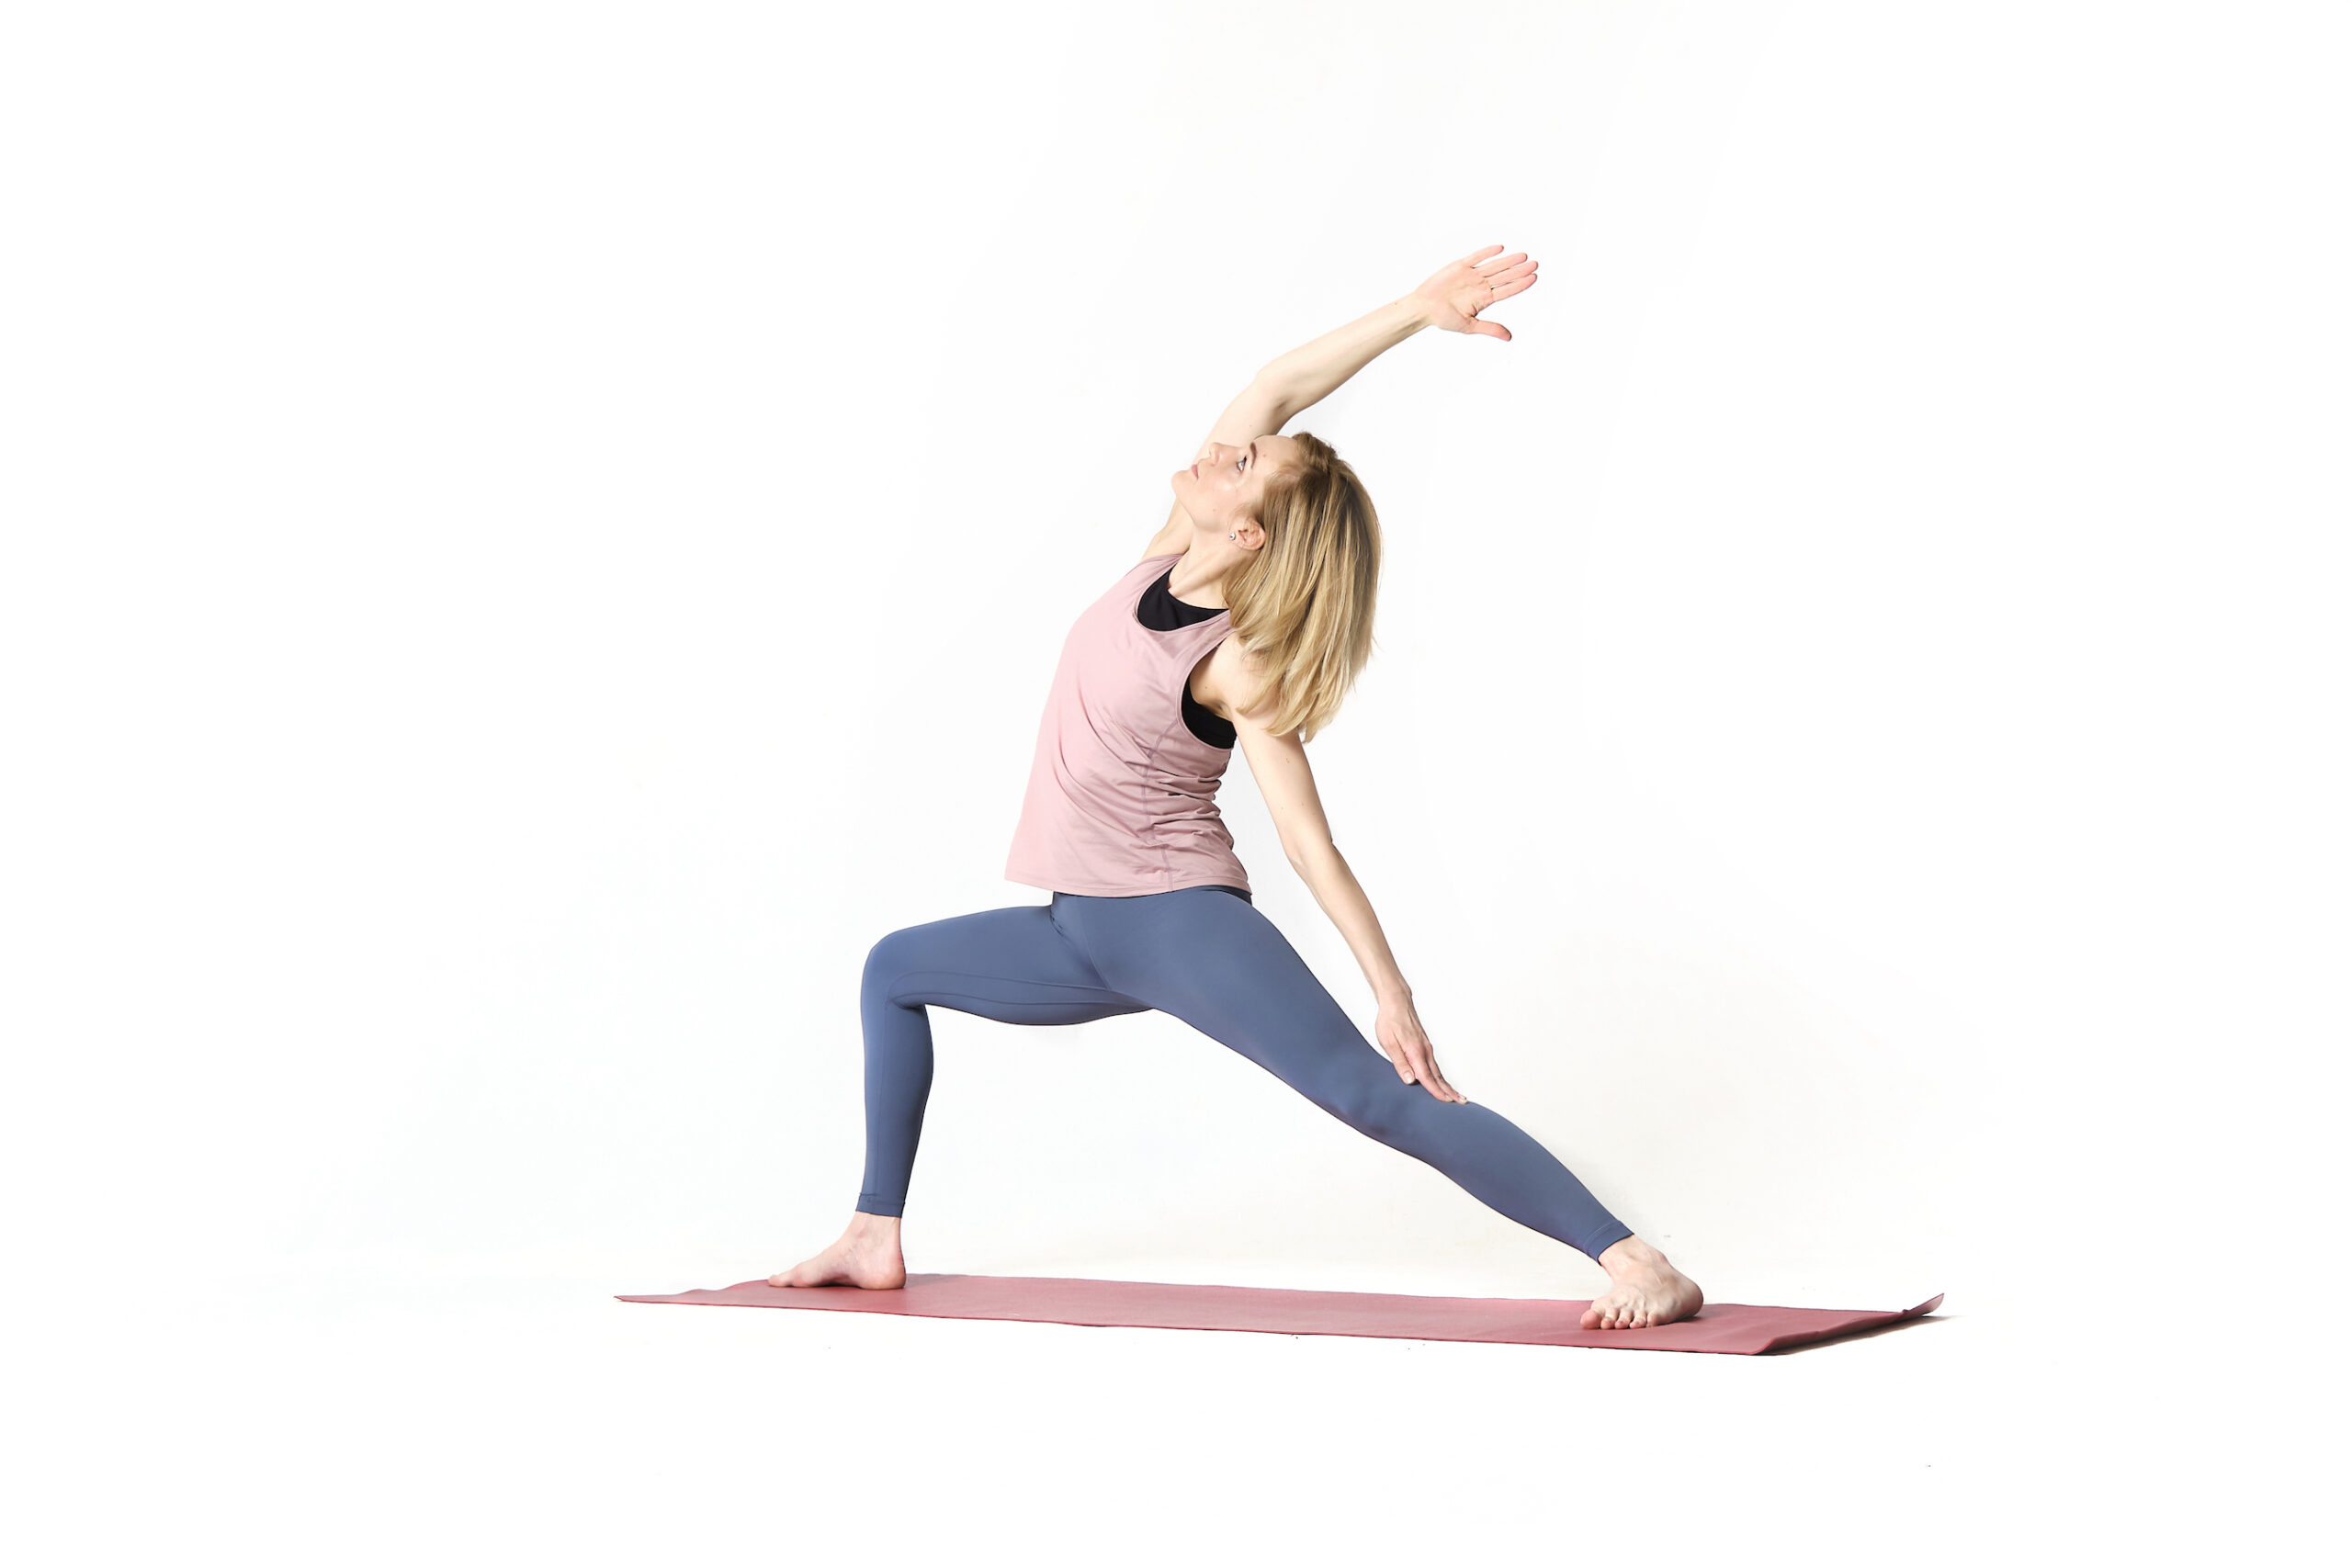 A woman doing a yoga pose on a white background.